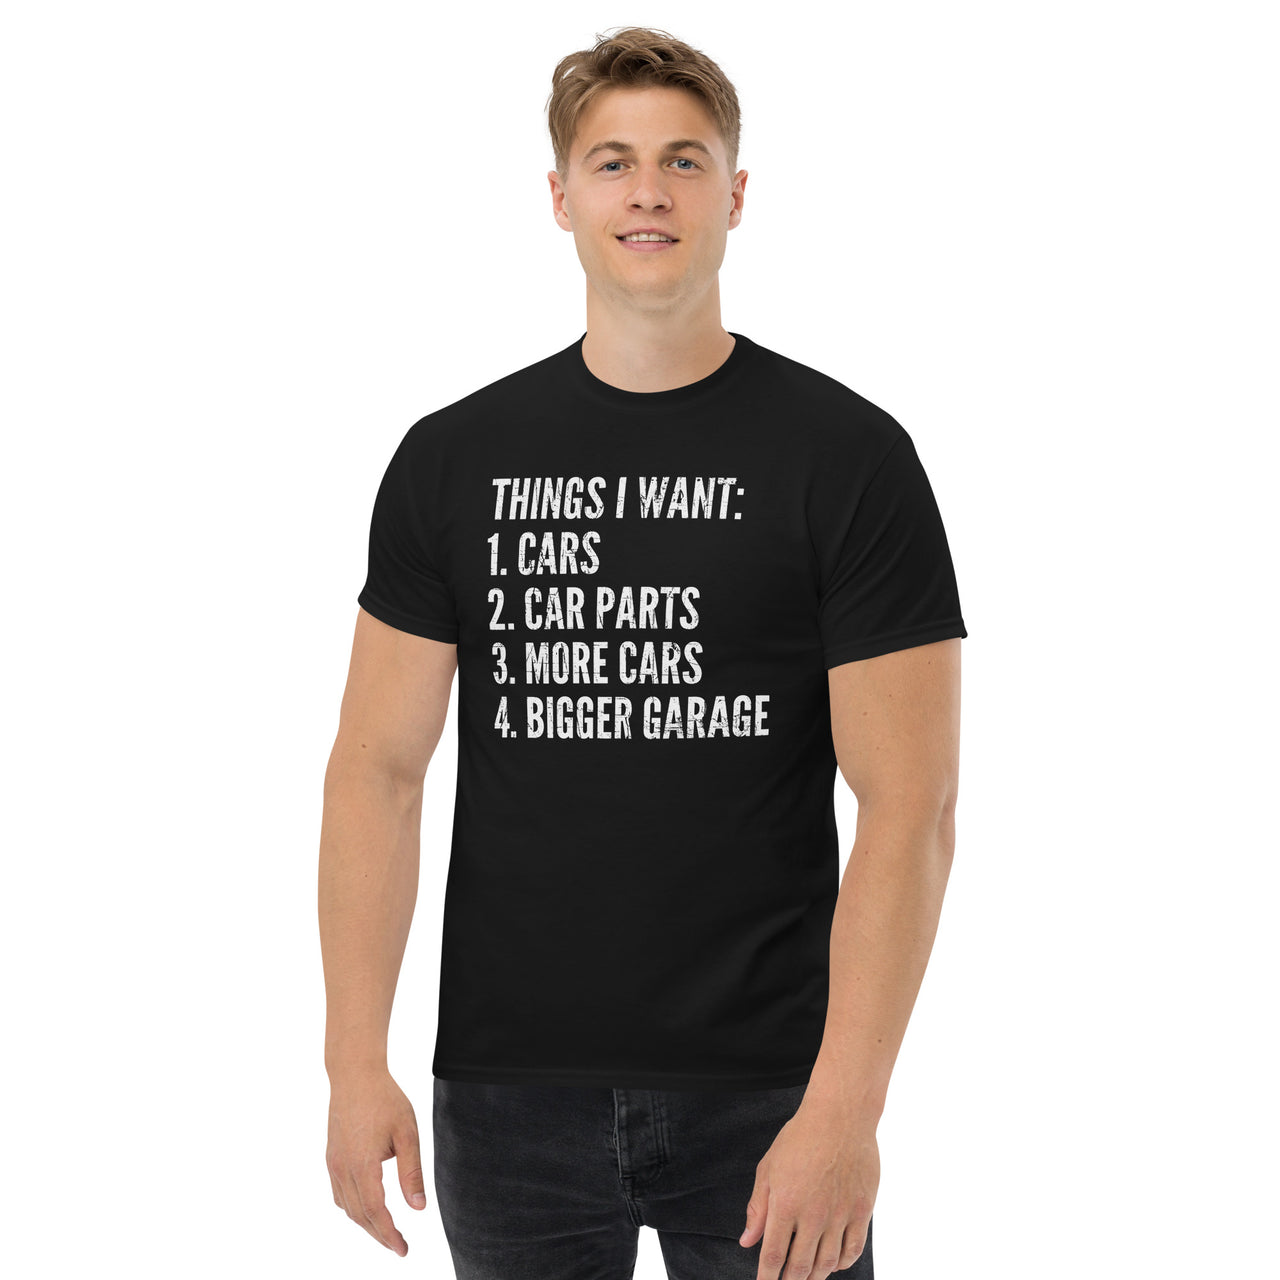 Funny Car Enthusiast T-Shirt Things I Want modeled in black